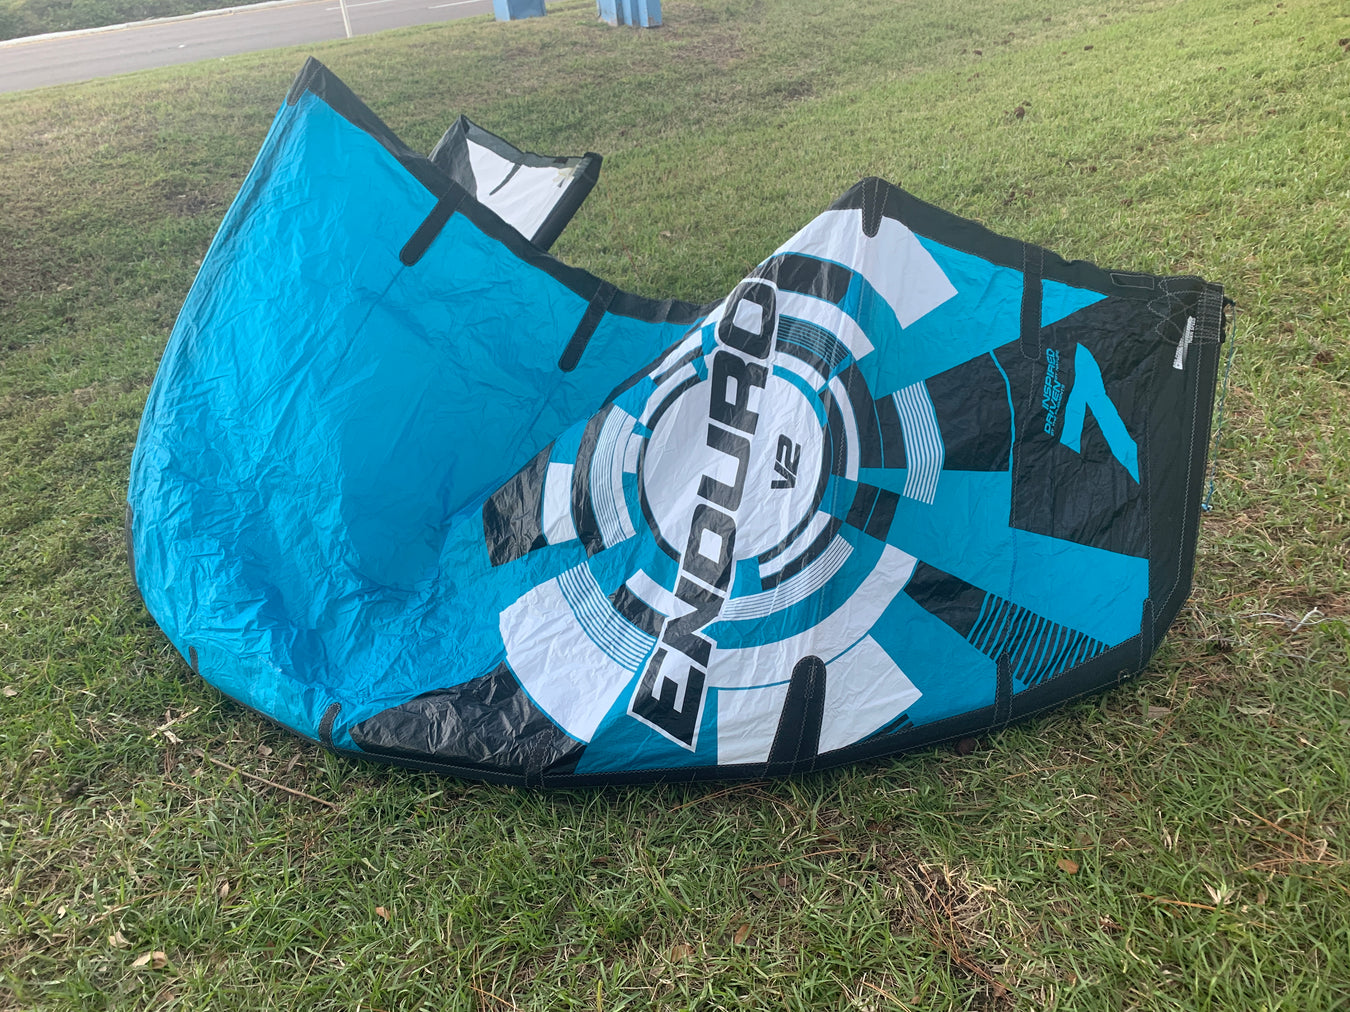 Pre-owned and Demo Kites